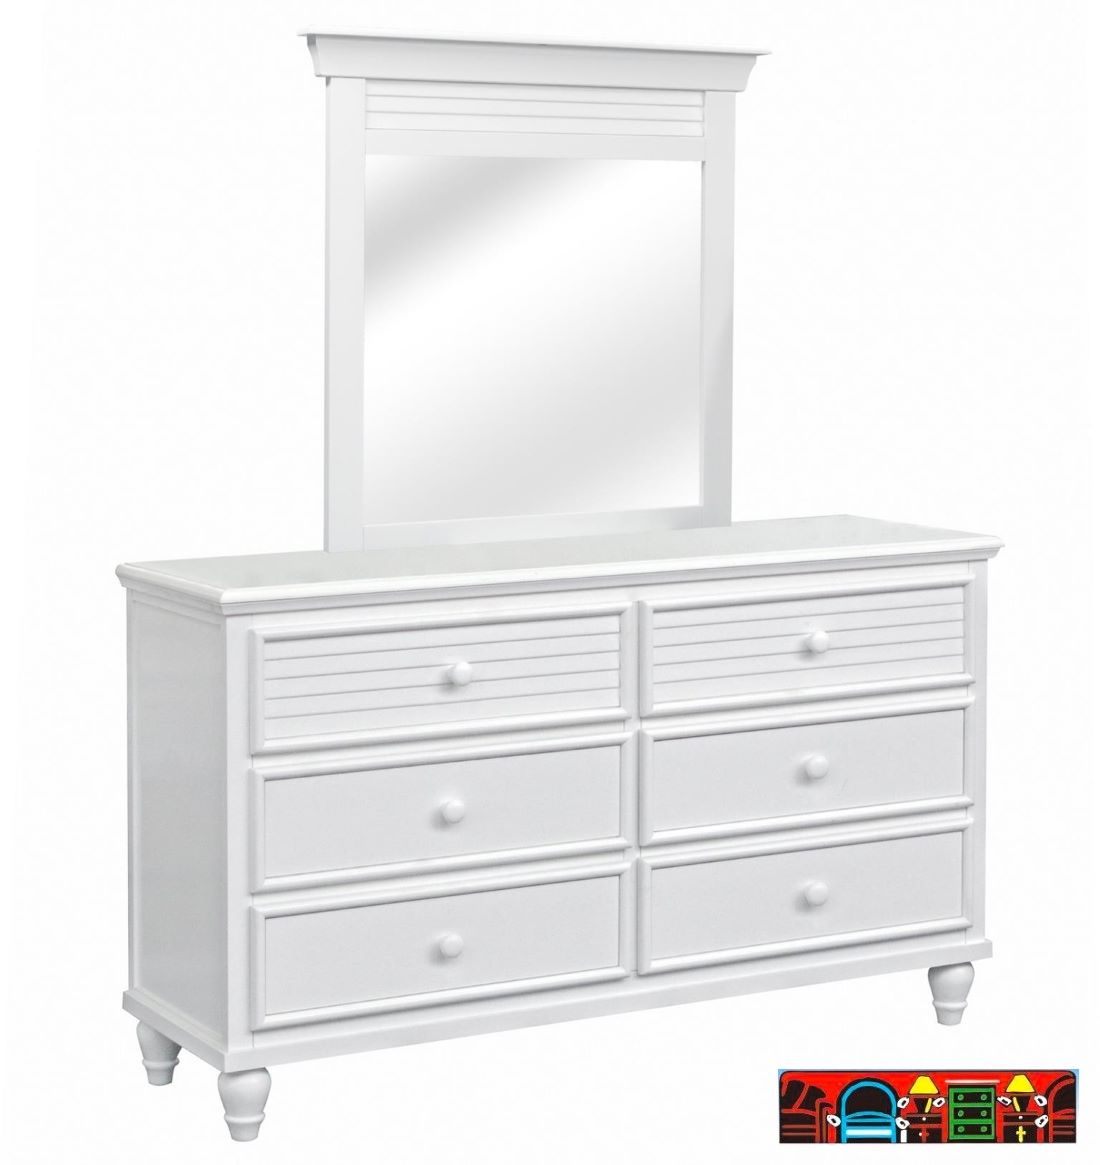 Sunset Dresser and Mirror, crafted from solid wood, featuring a white finish, six drawers and louver accents.